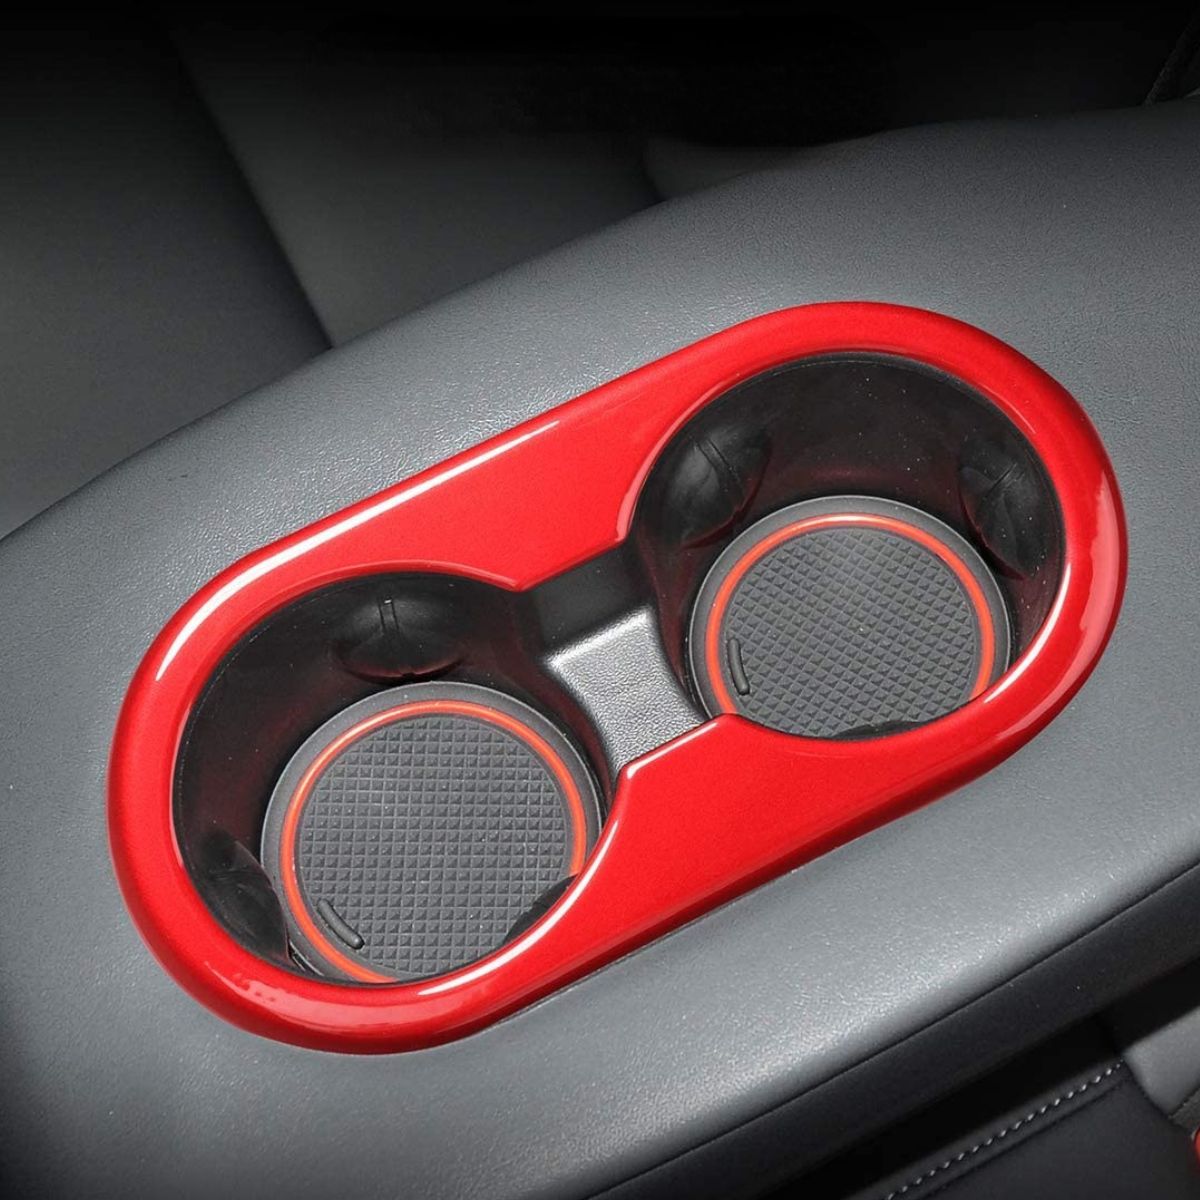 Rear Seat Water Cup Holder Trim Interior Accessories for Tesla Model 3 / Y - Tesery Official Store